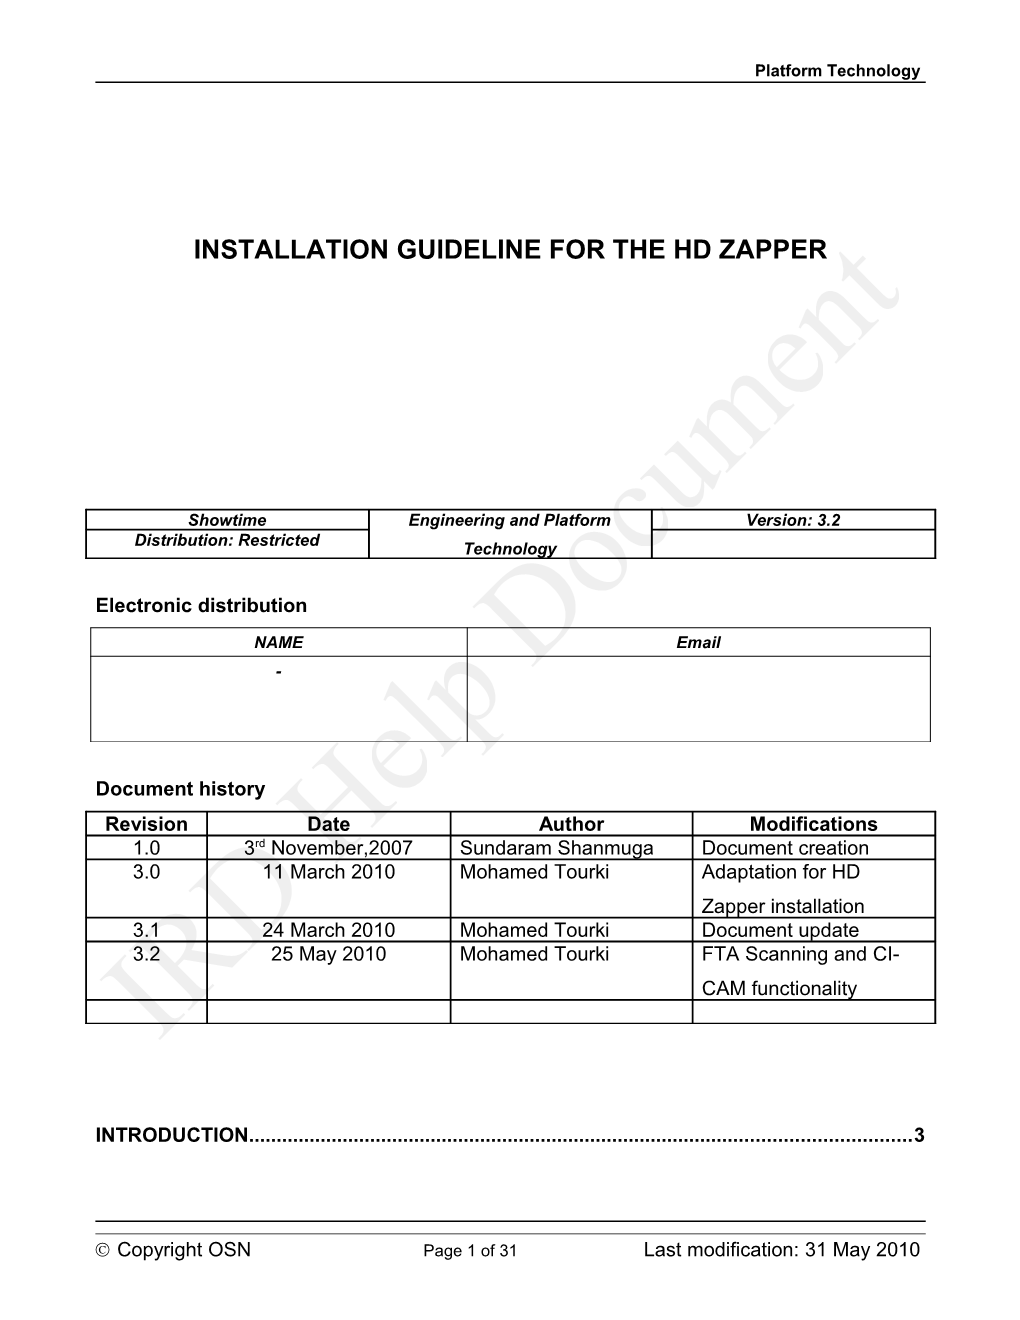 Installation Guideline for the Hd Zapper